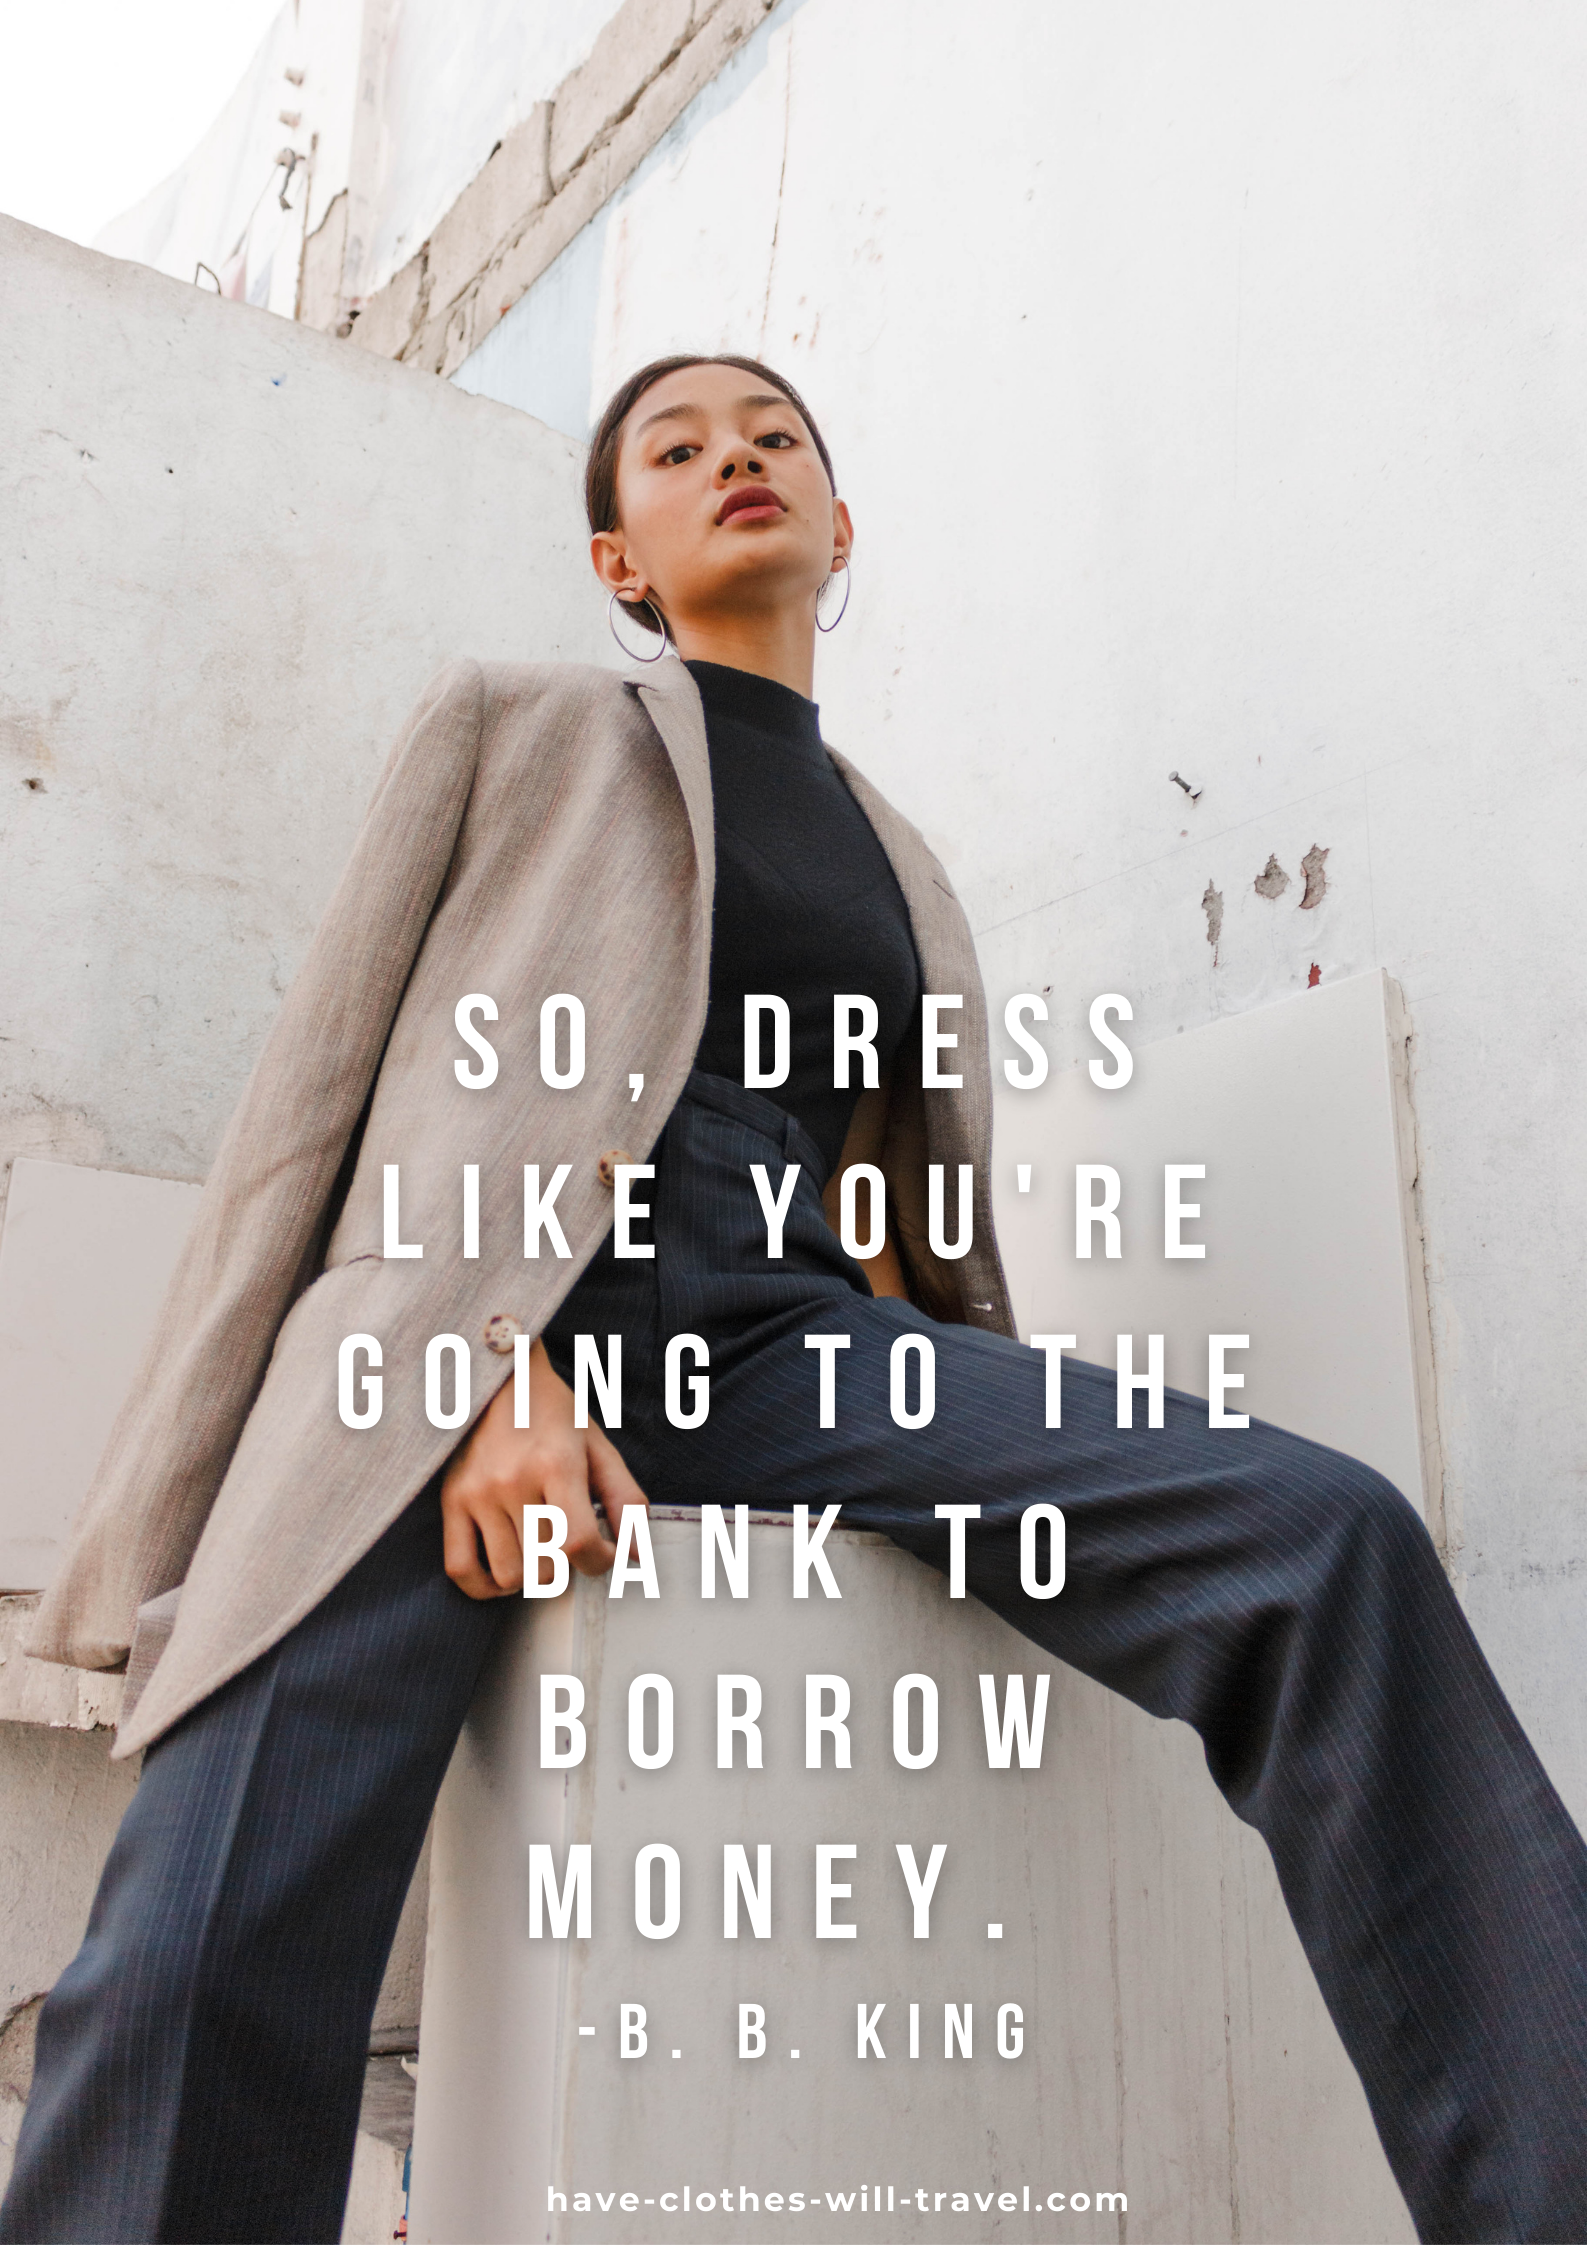 A high-fashion model poses wearing an all-black outfit with a tan blazer over her shoulders. Text across the image says, "So, dress like you're going to the bake to borrow money. - BB King"